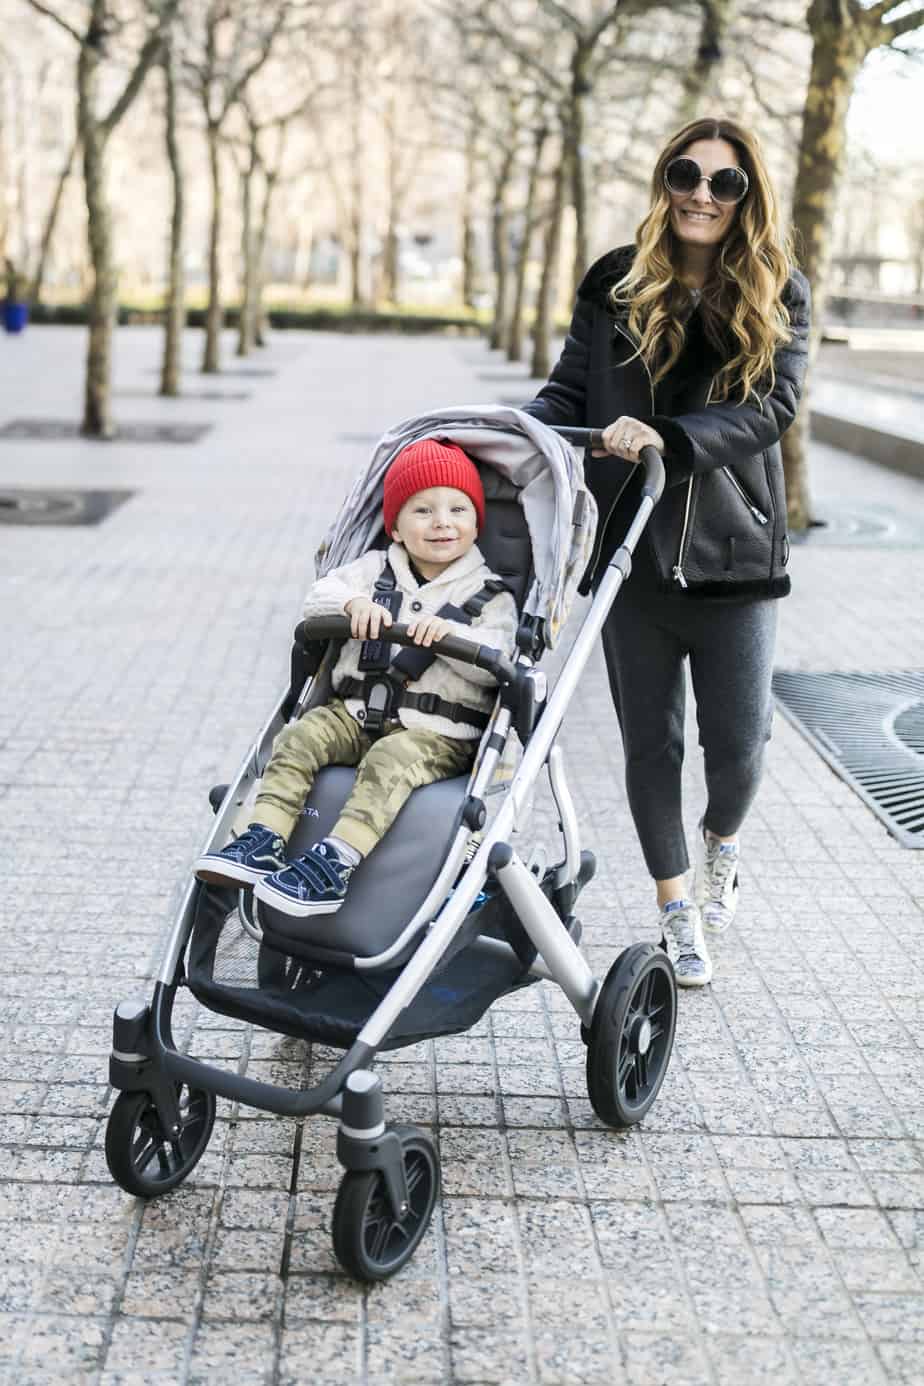 UPPAbaby VISTA review - Spenser Convertible Stroller | Stroller In The City